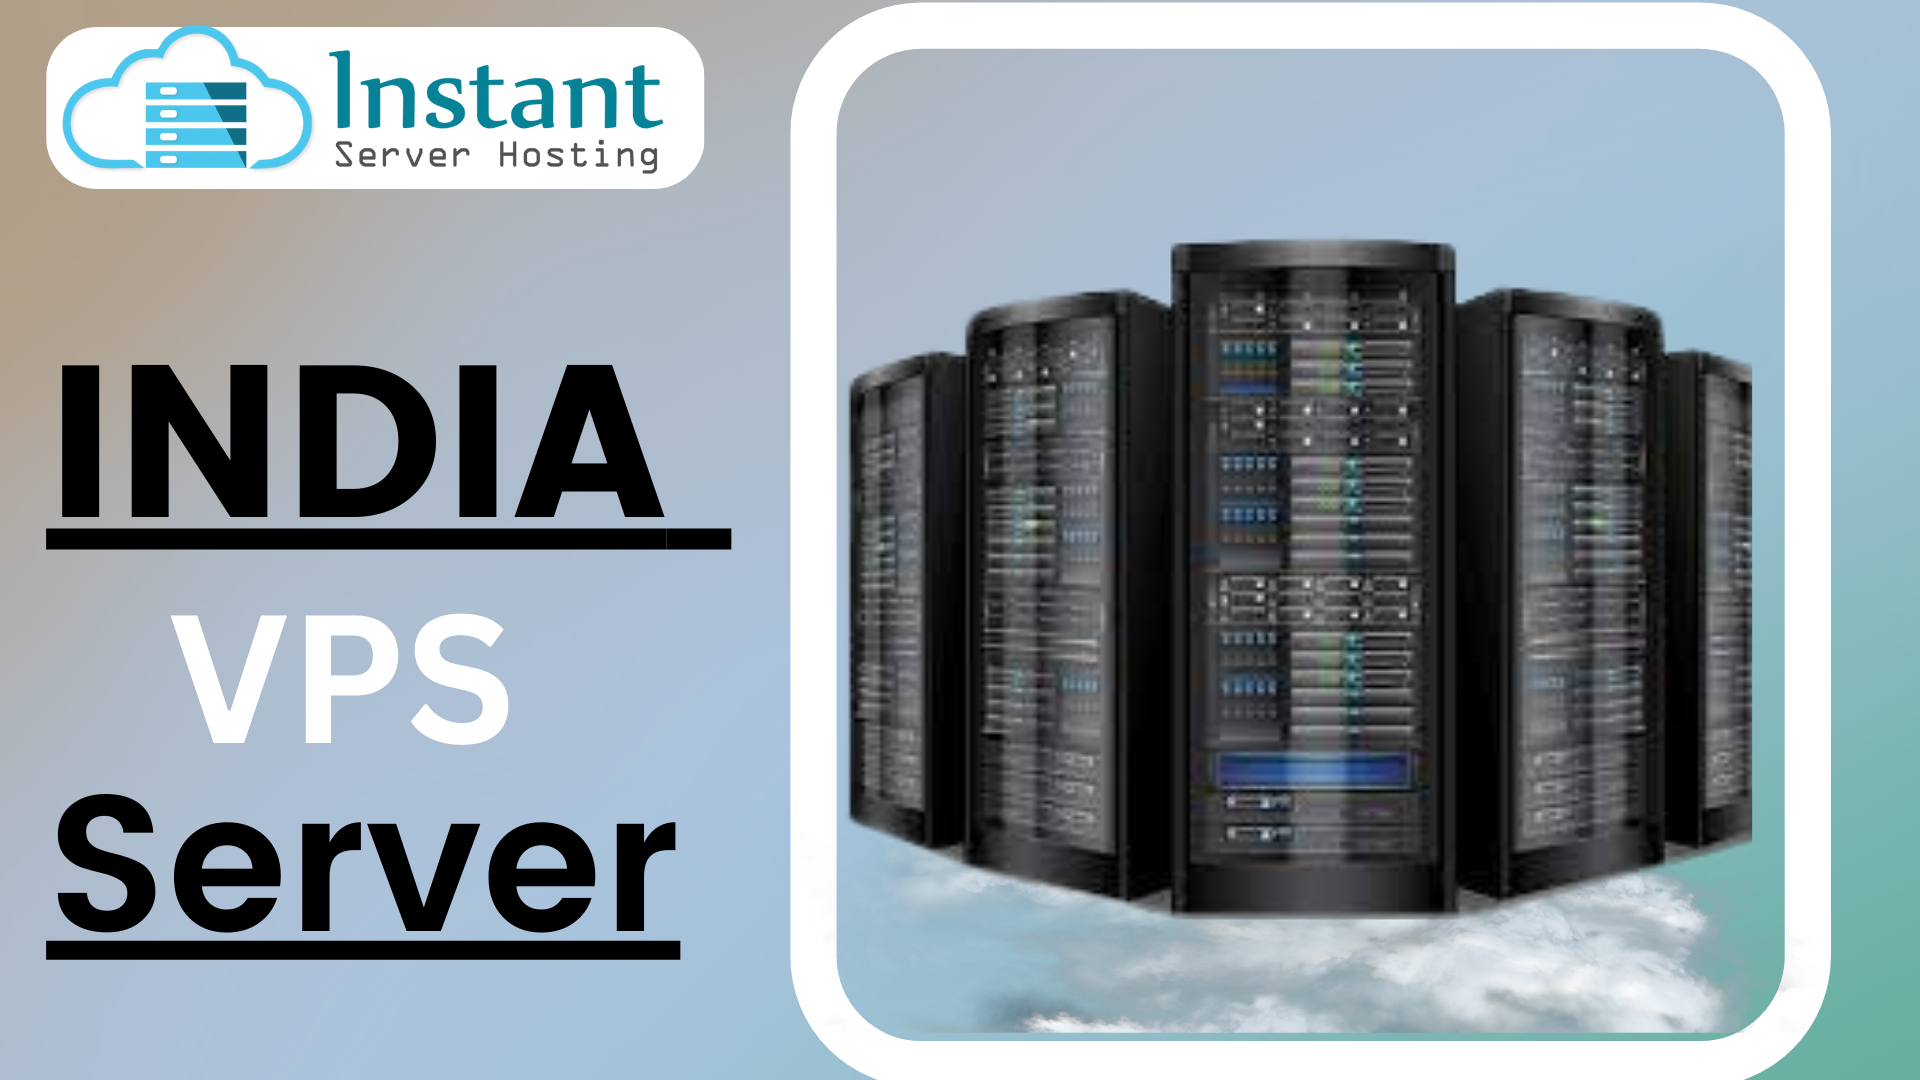 Get the Most Scalable India VPS Server by Instant Server Hosting